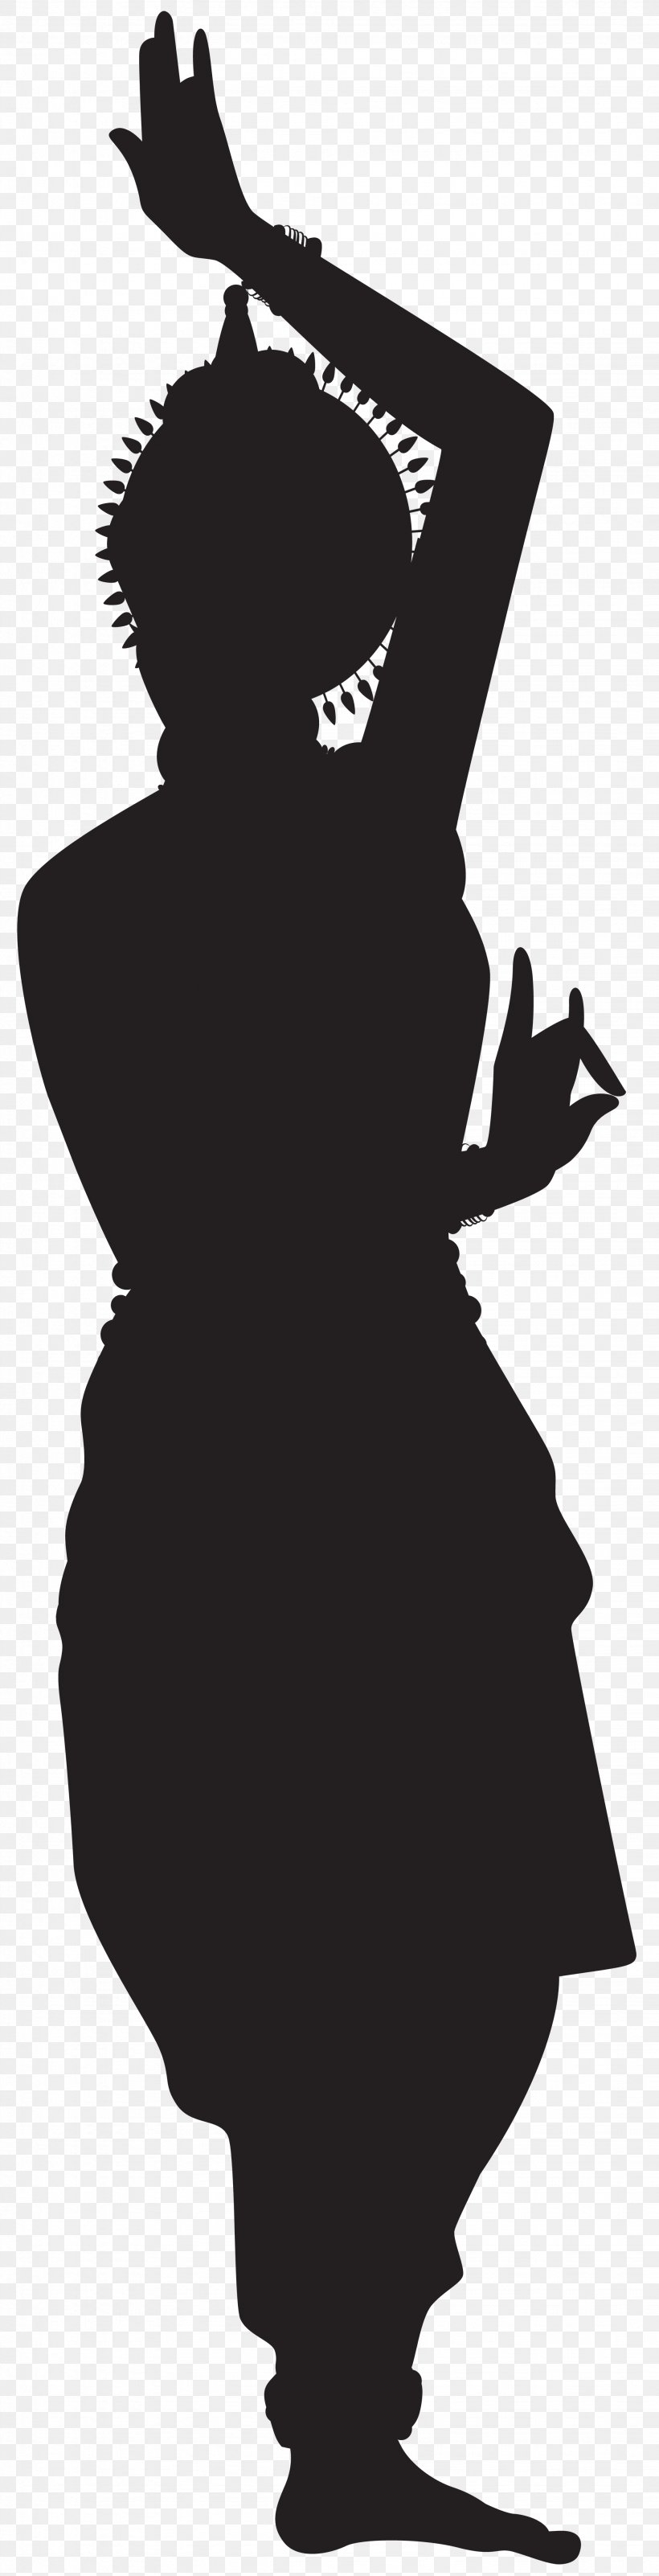 Clip Art Silhouette Dance In India Dance In India, PNG, 2047x8000px, Silhouette, Art, Ballet, Black, Black And White Download Free